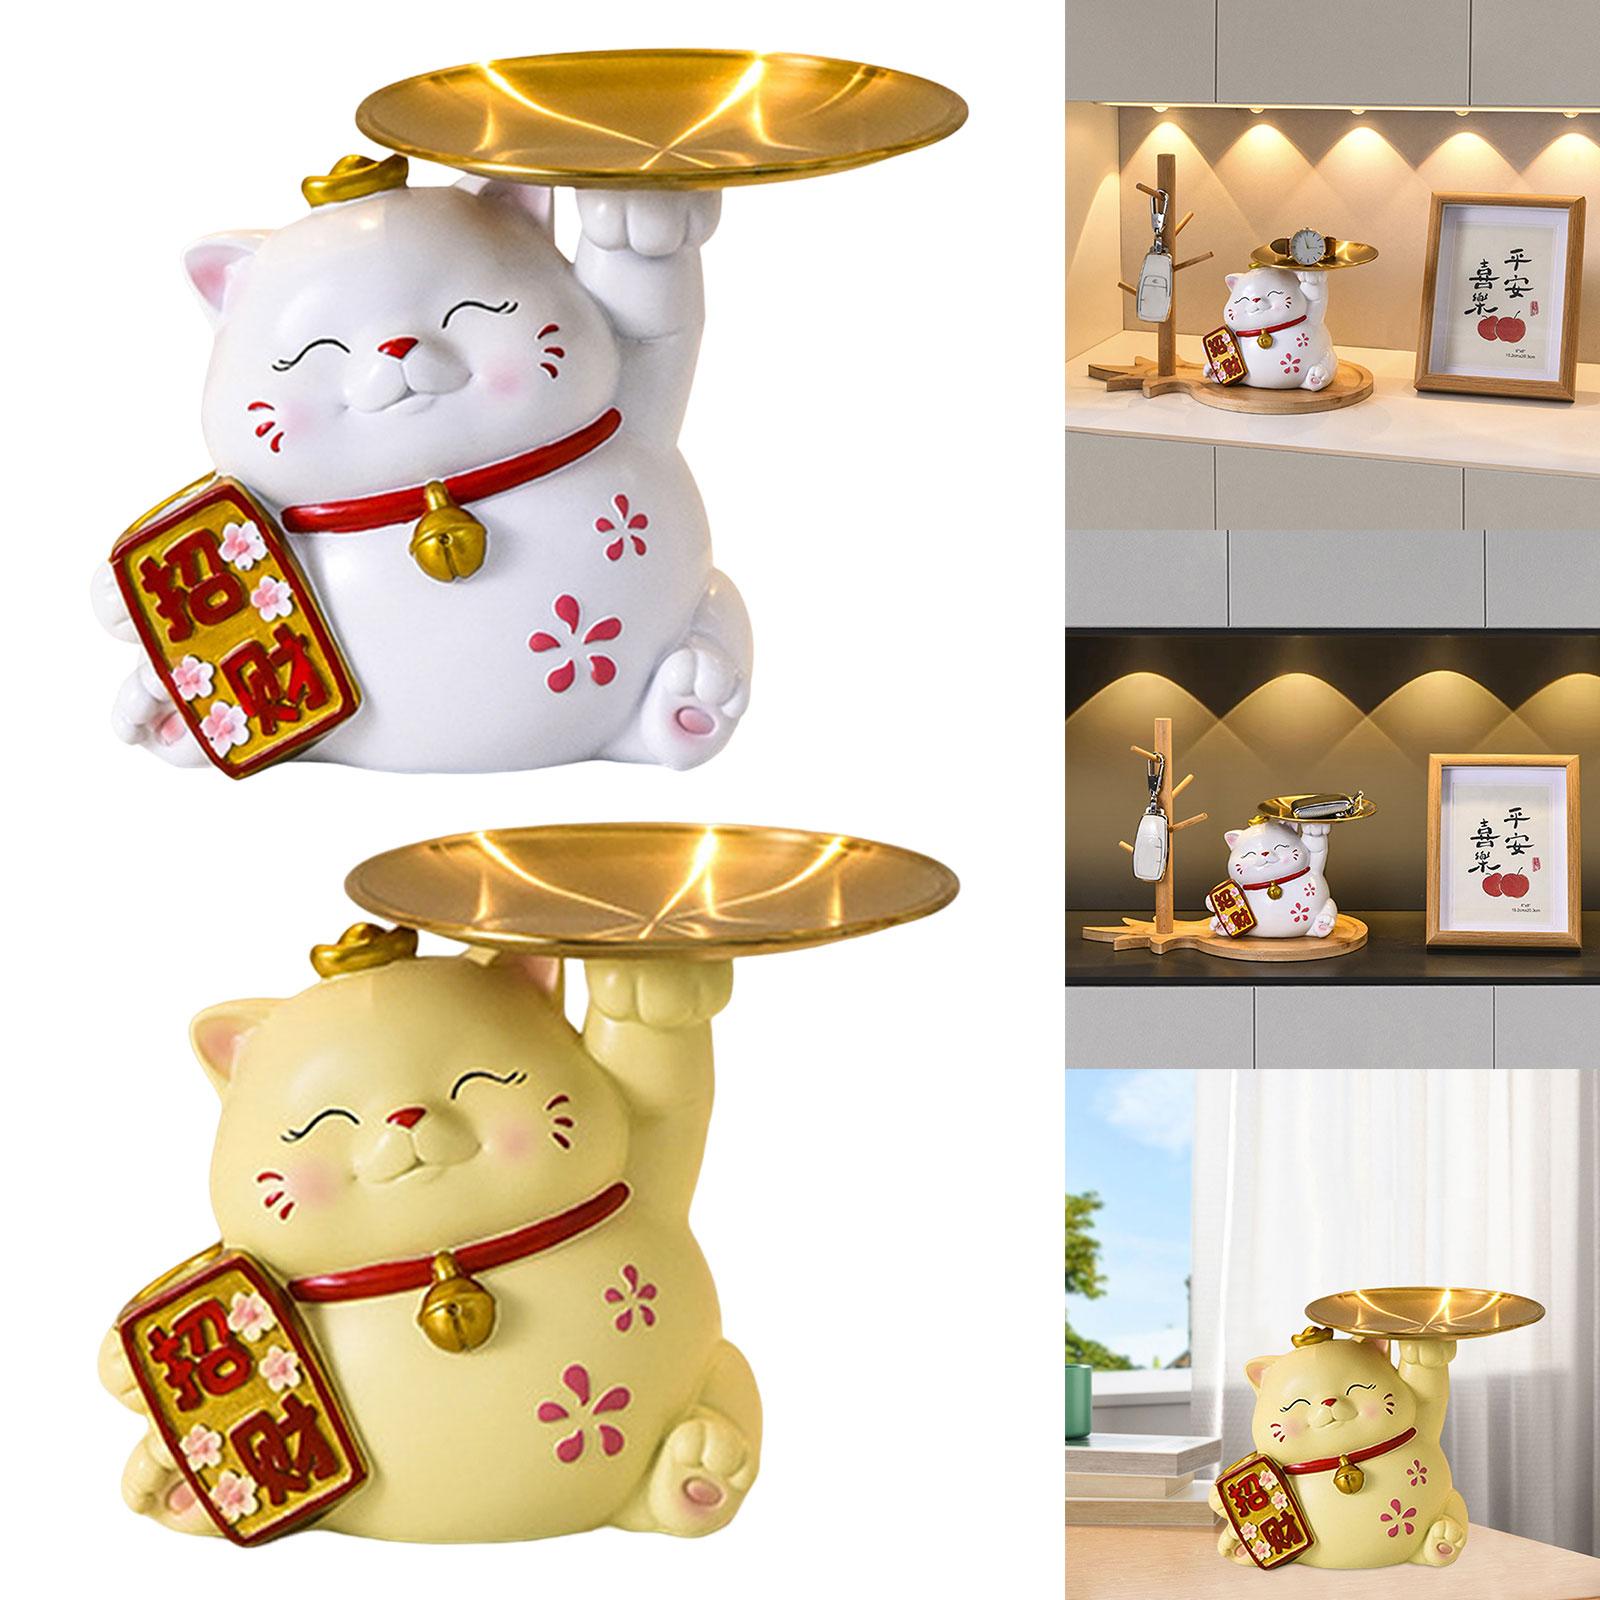 Lucky Cats Statue Home Decoration Keys Holder Sculpture Jewelry Trinket Tray White